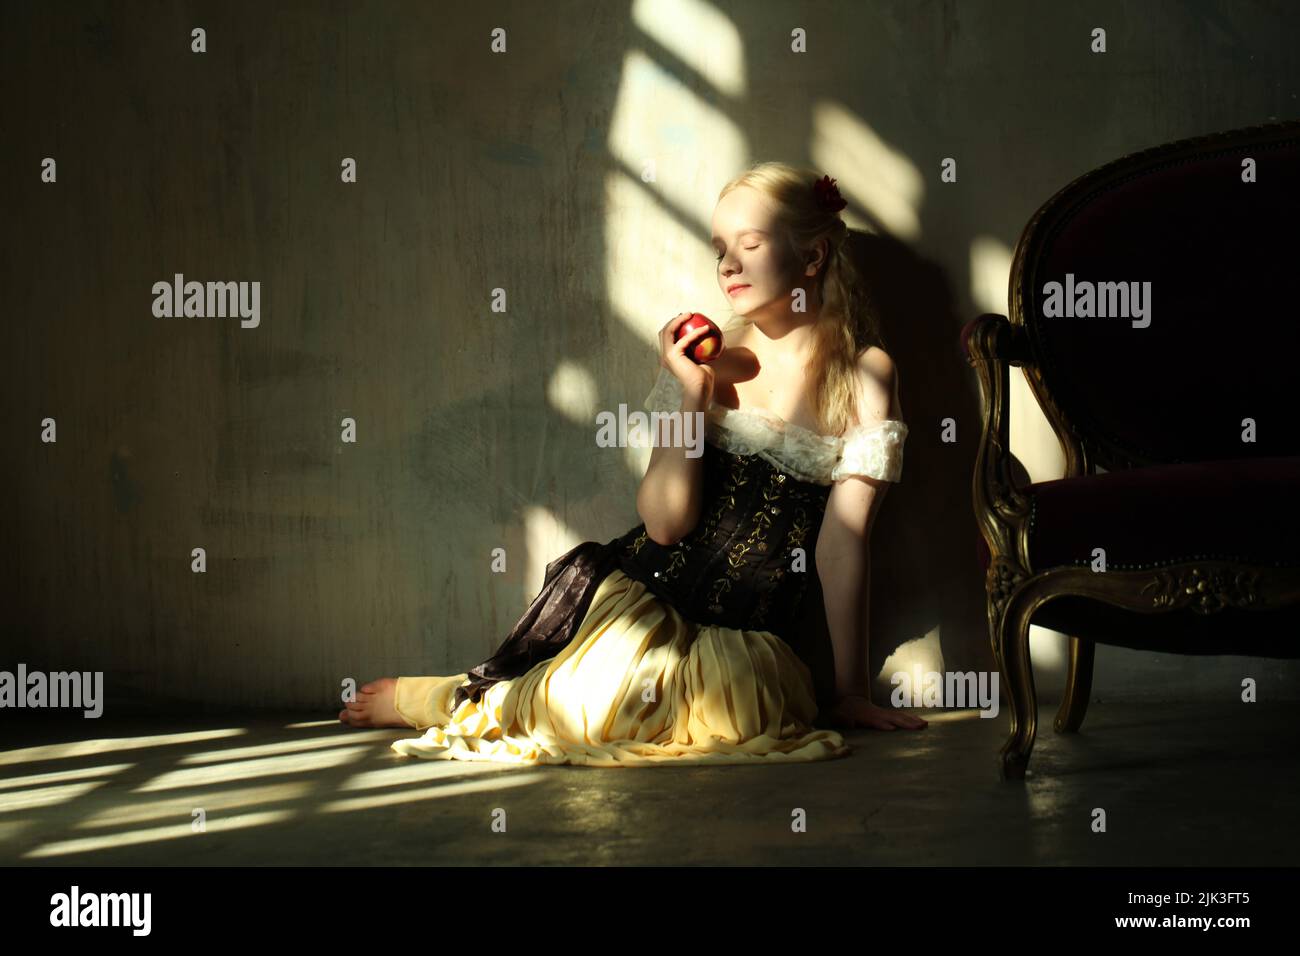 Young woman in conceptual light and shadow Stock Photo